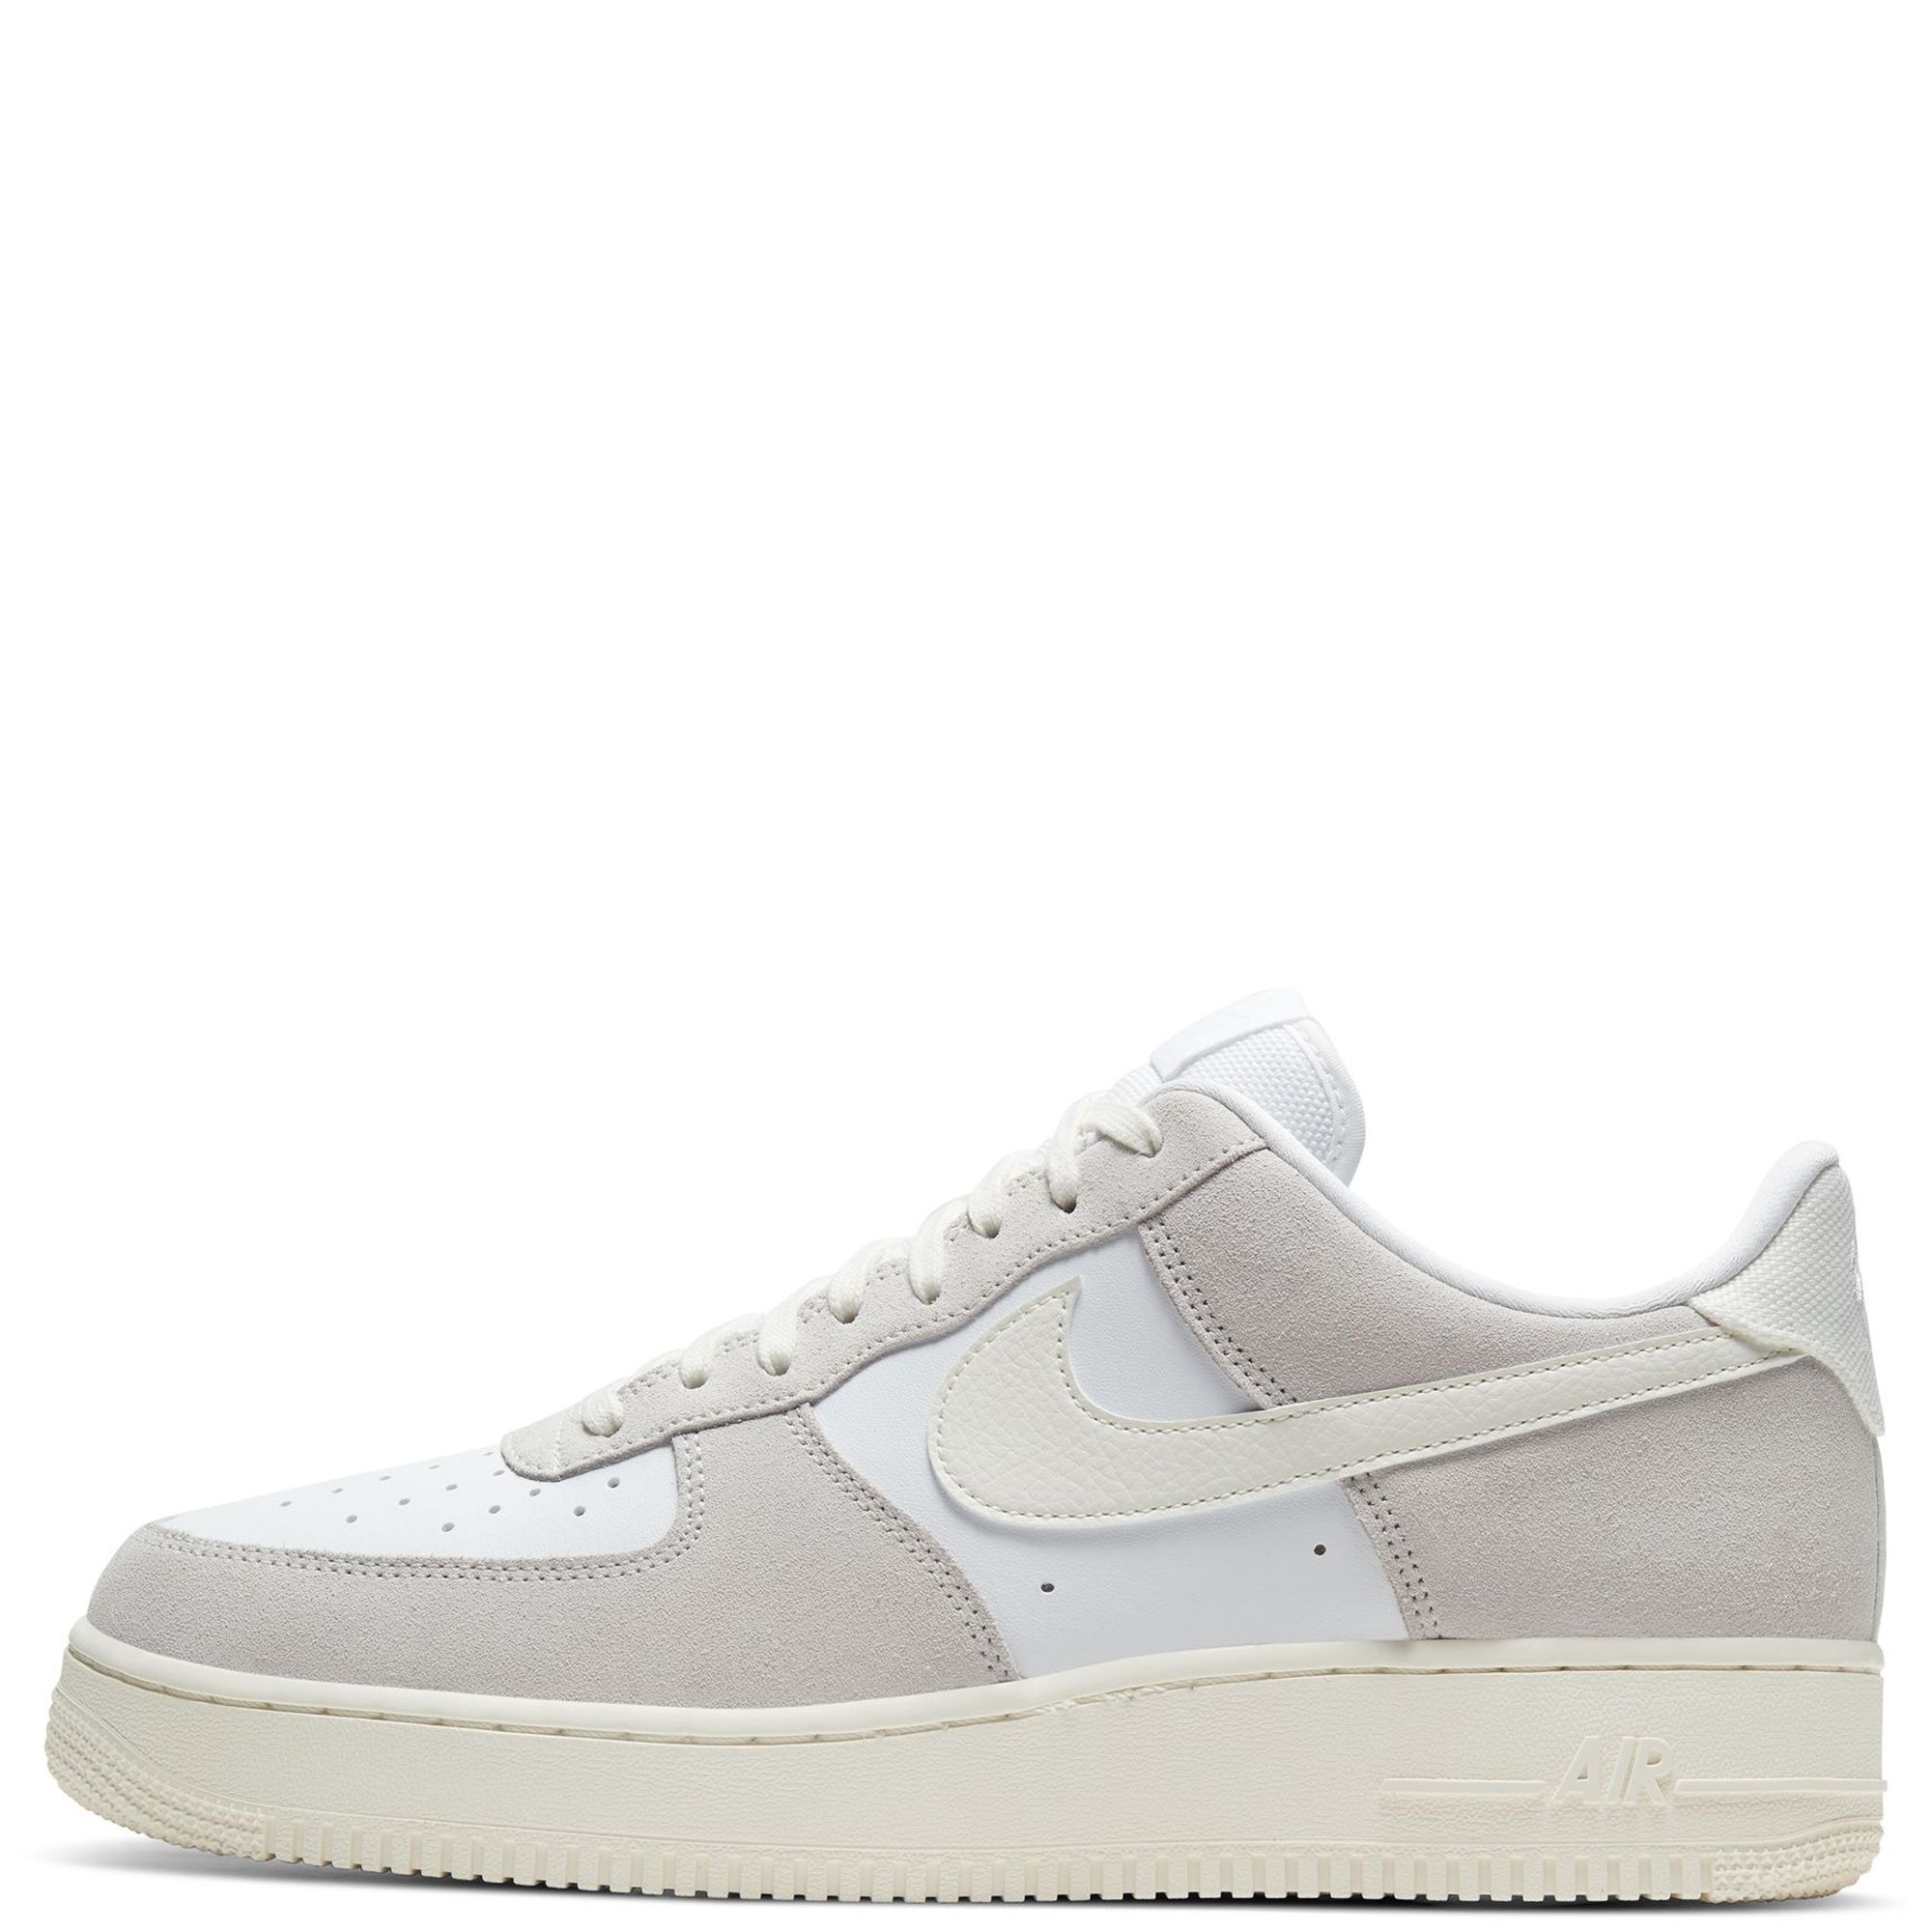 Nike Air Force 1 LV8 Men's Casual Shoes